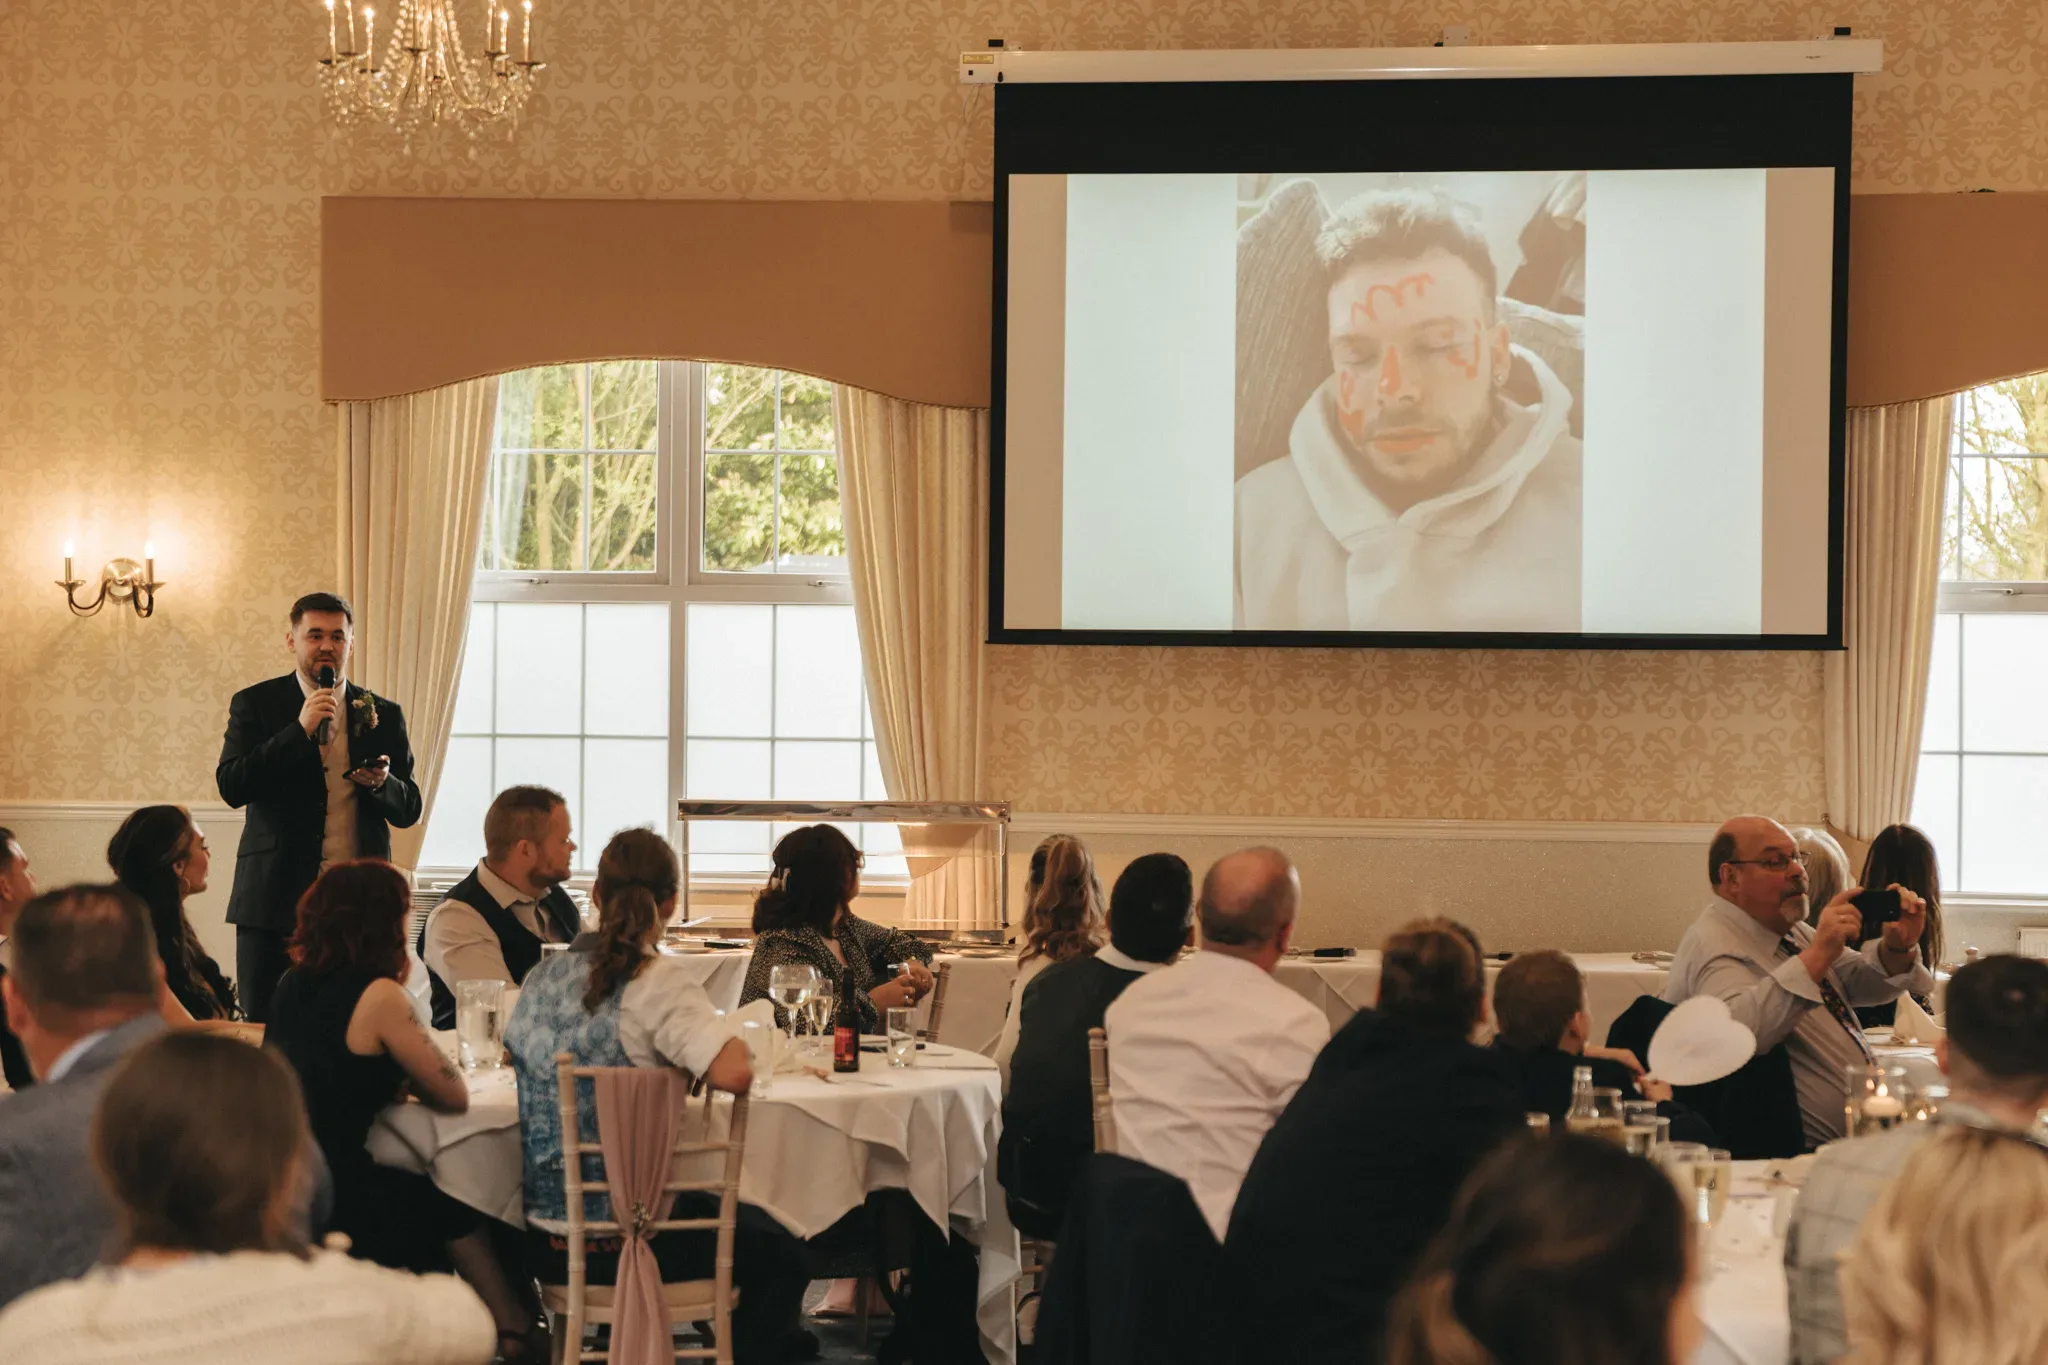 An elegant room with guests seated at tables listening to a man giving a speech. behind the speaker, a large screen displays a humorous photo of a man with playful writing on his forehead. chandeliers hang from the ceiling, adding a sophisticated touch to the setting.